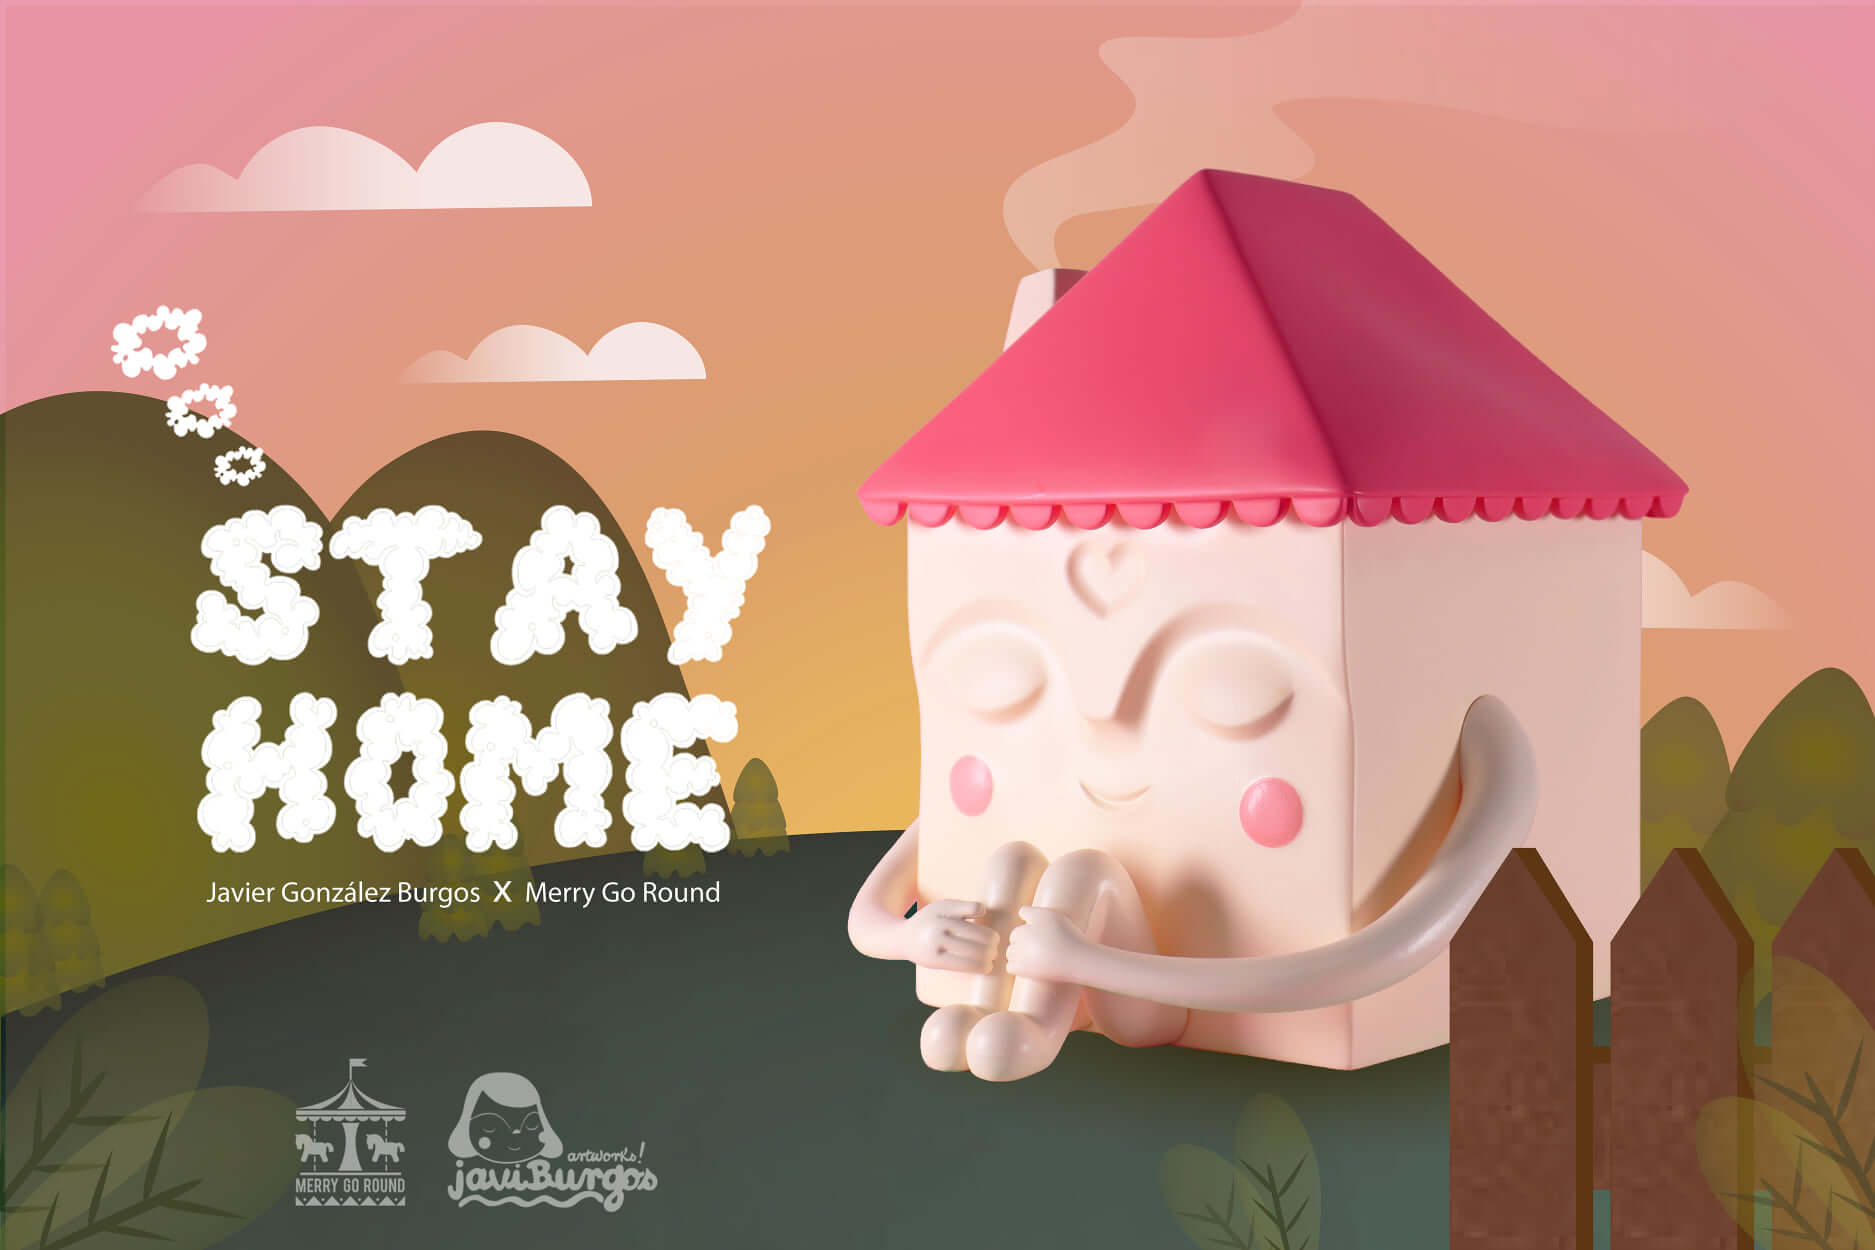 The Toy Chronicle Stay Home Pink Version By Javier Gonzalez Burgos X Merry Go Round Toys